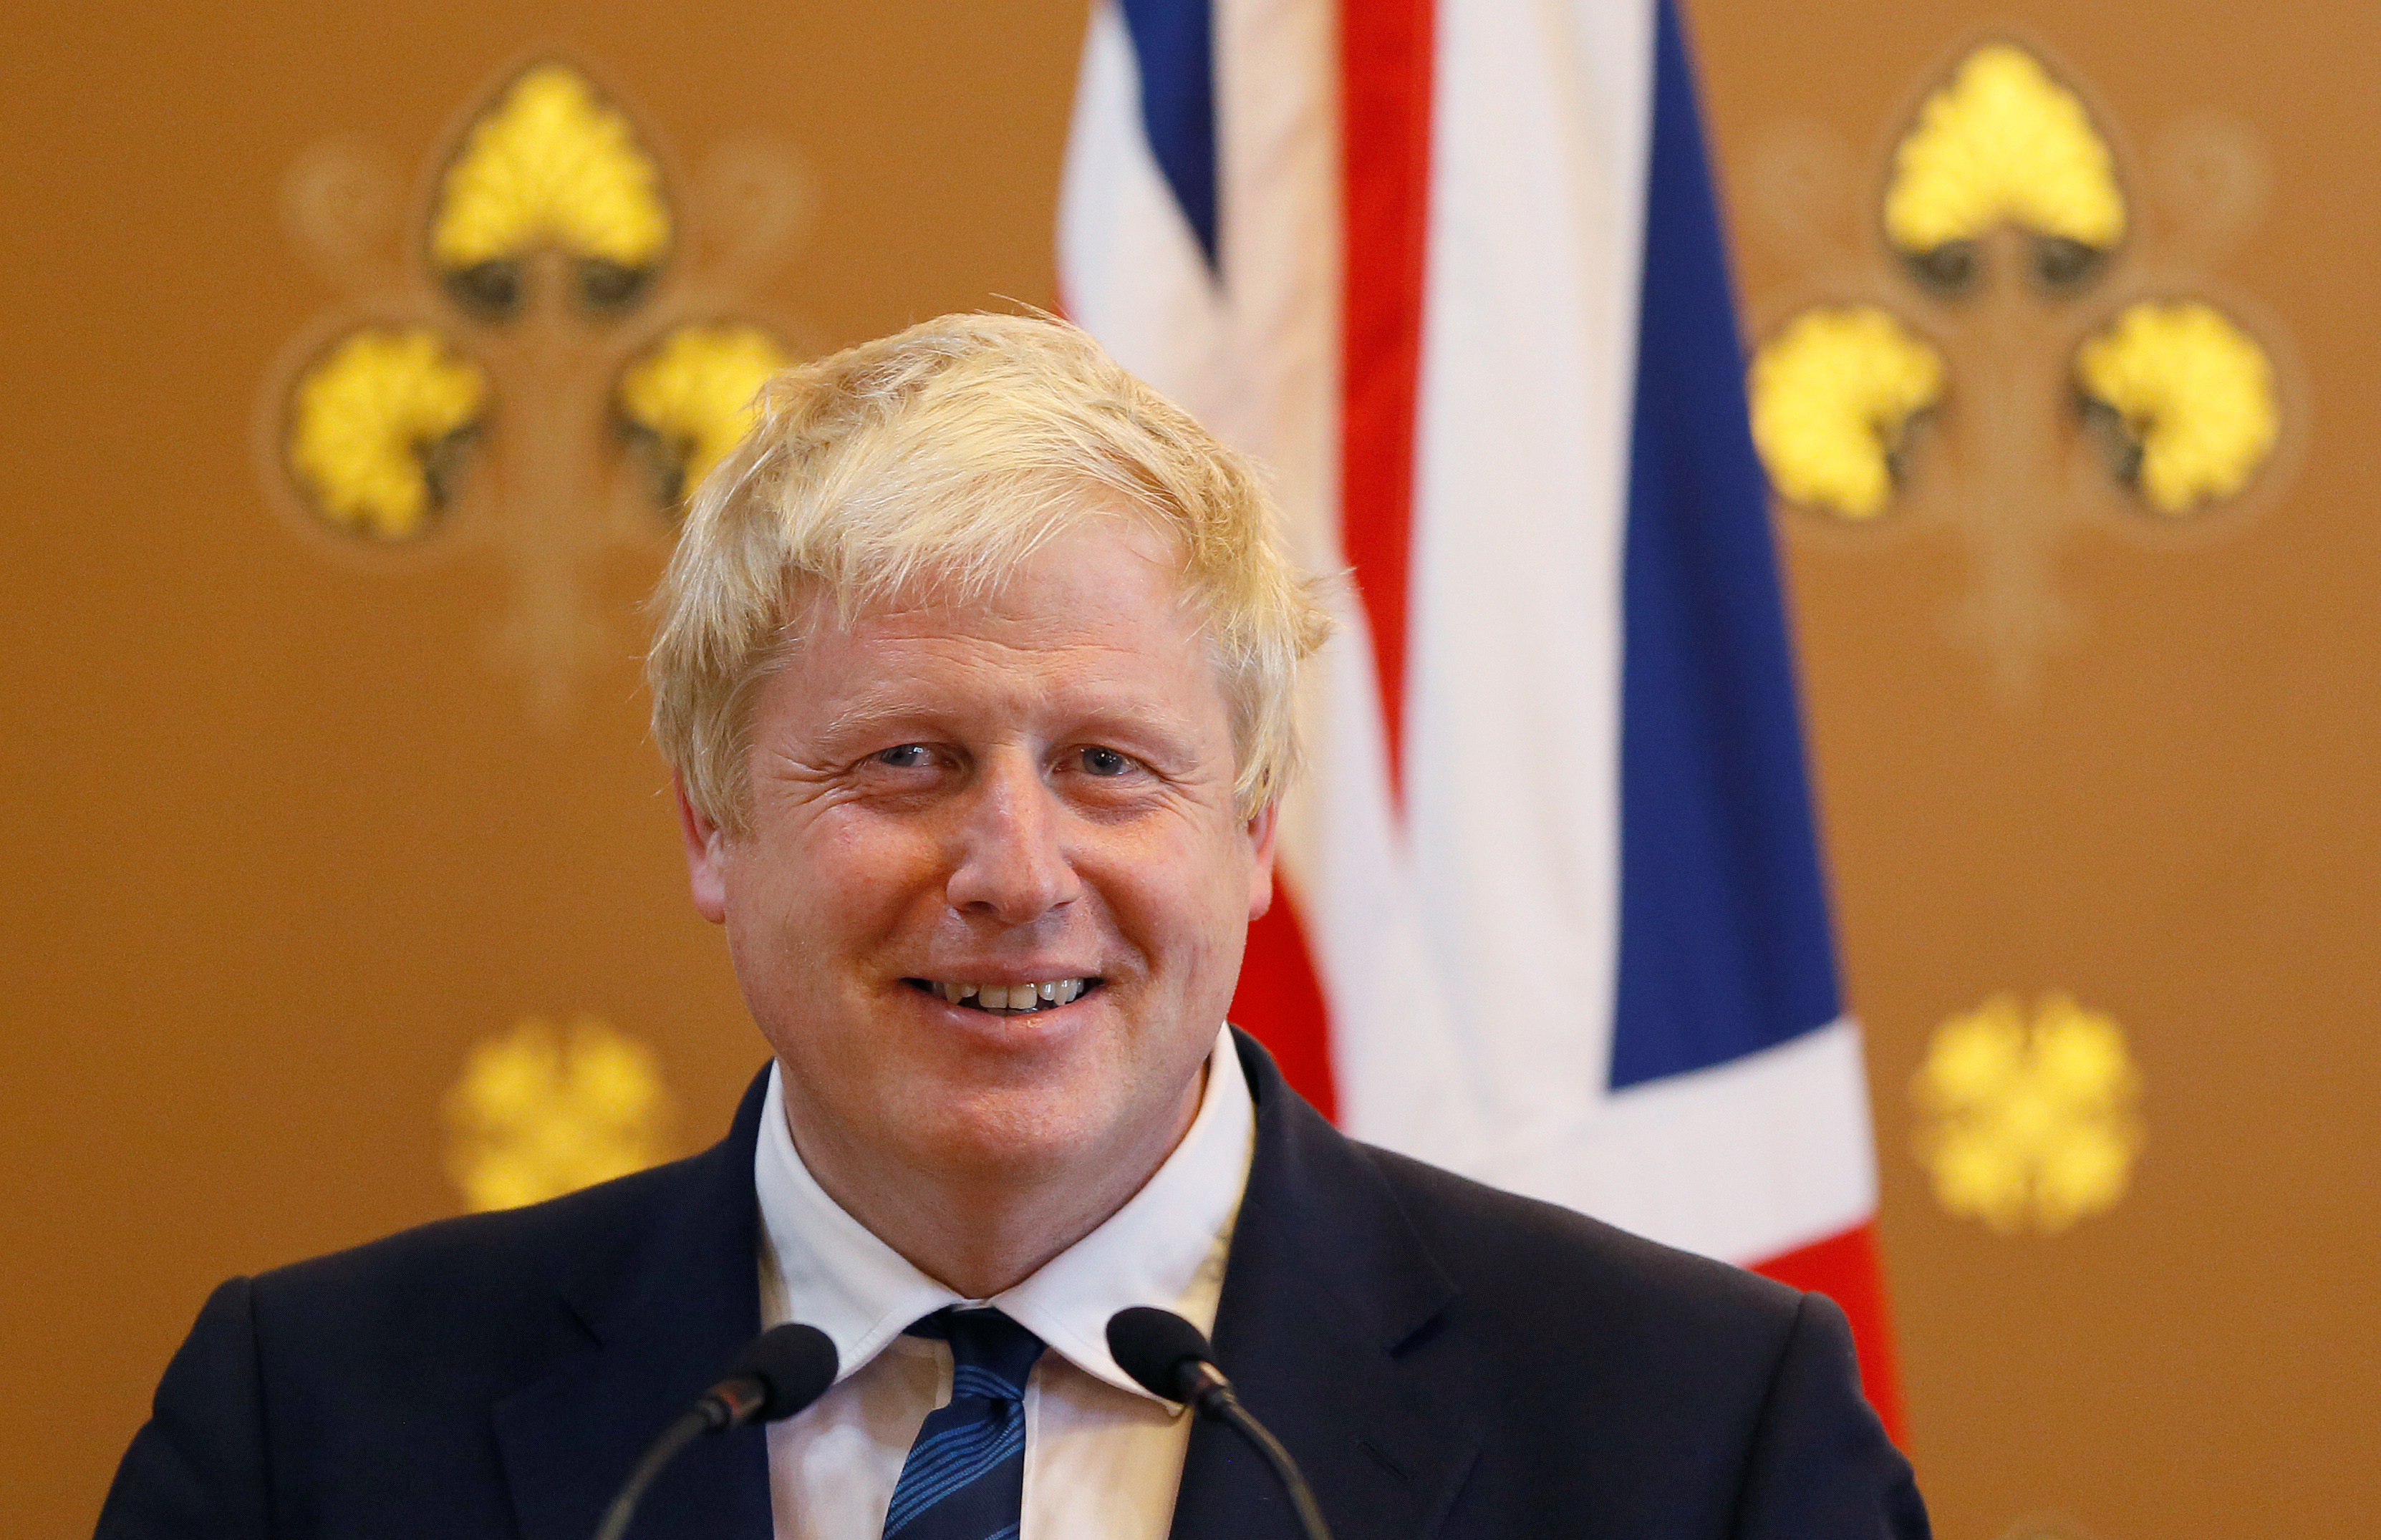 Britain's Foreign Secretary Boris Johnson smiles during a press conference with U.S. Secretary of State John Kerry at the Foreign Office in London, July 19, 2016 (Reuters)